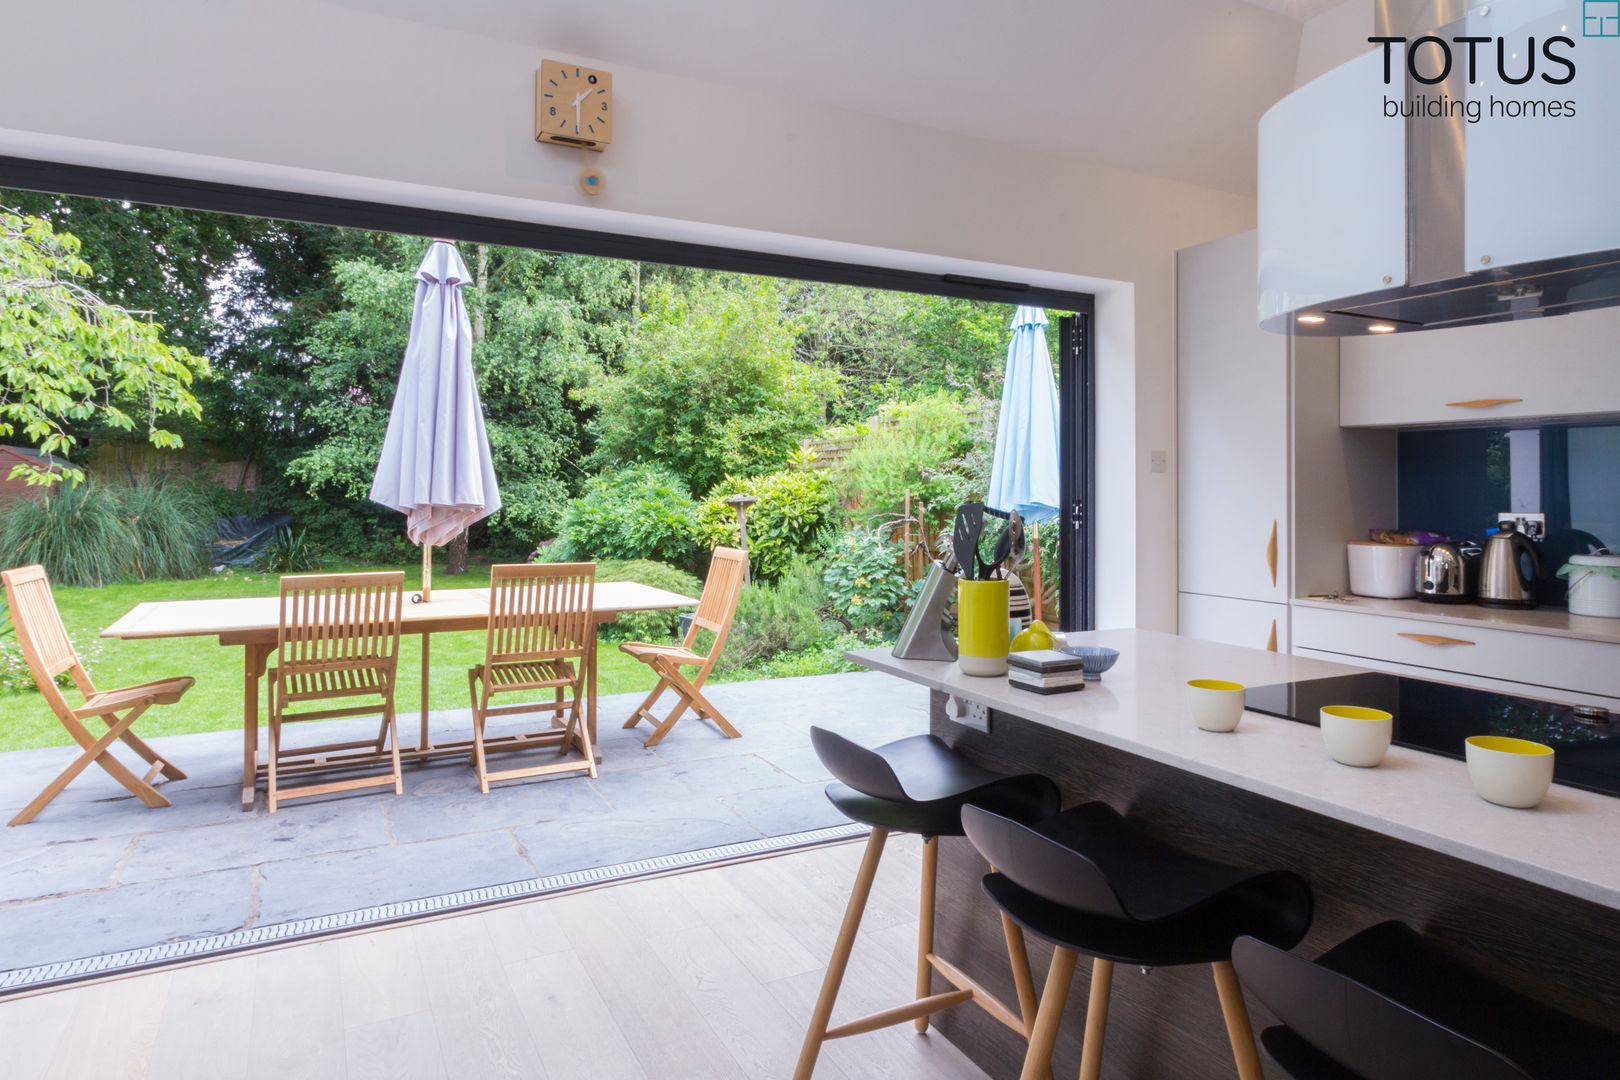 New life for a 1920s home - extension and full renovation, Thames Ditton, Surrey, TOTUS TOTUS Кухня в стиле модерн